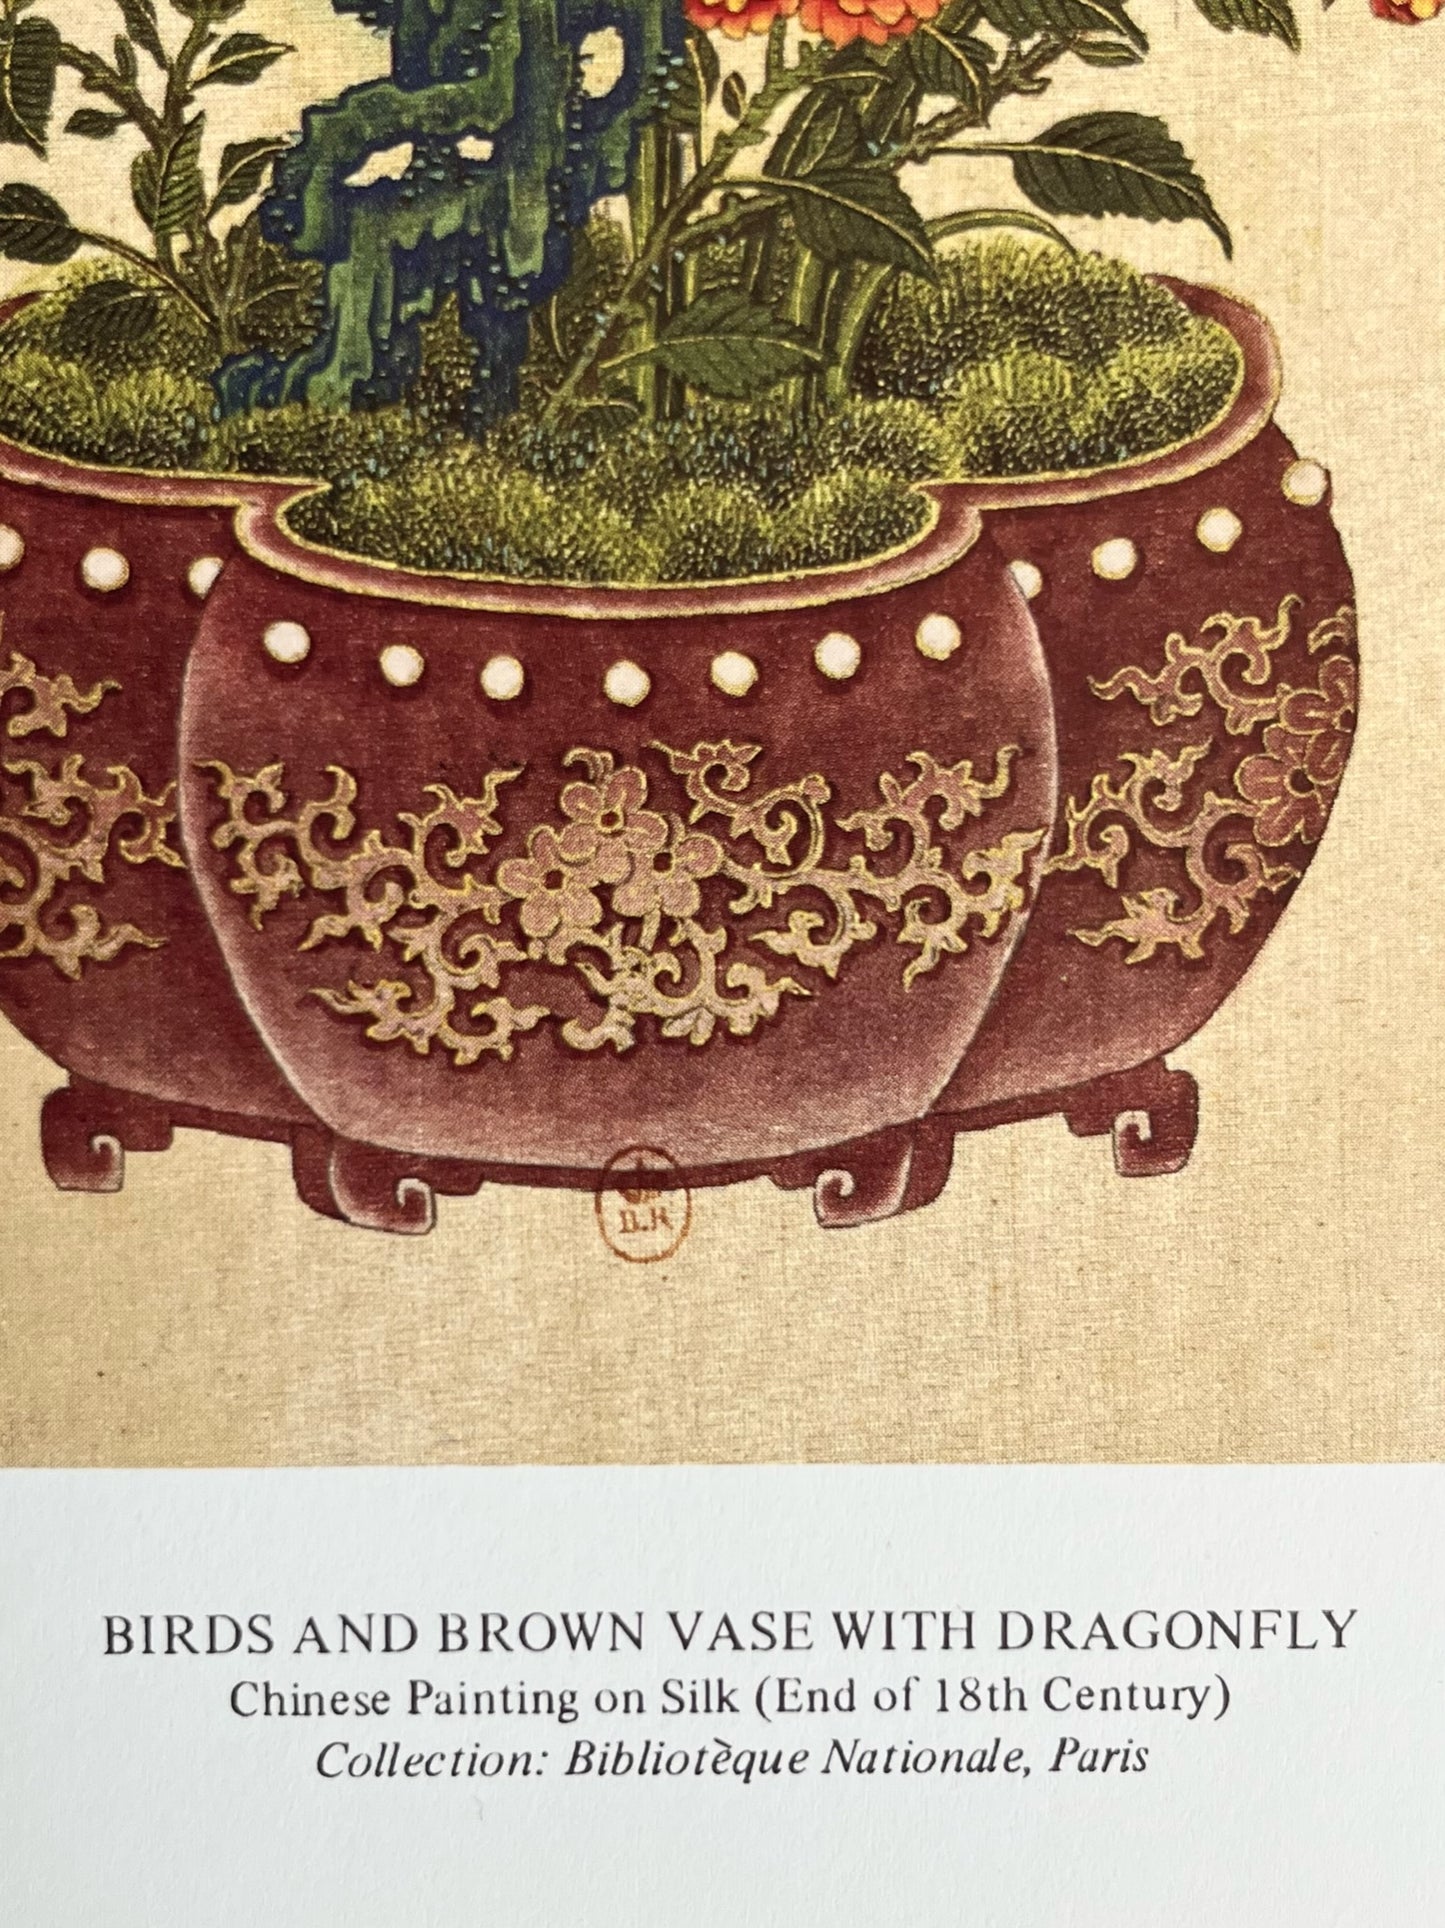 "Birds and Brown Vase with Dragonfly" Art Print